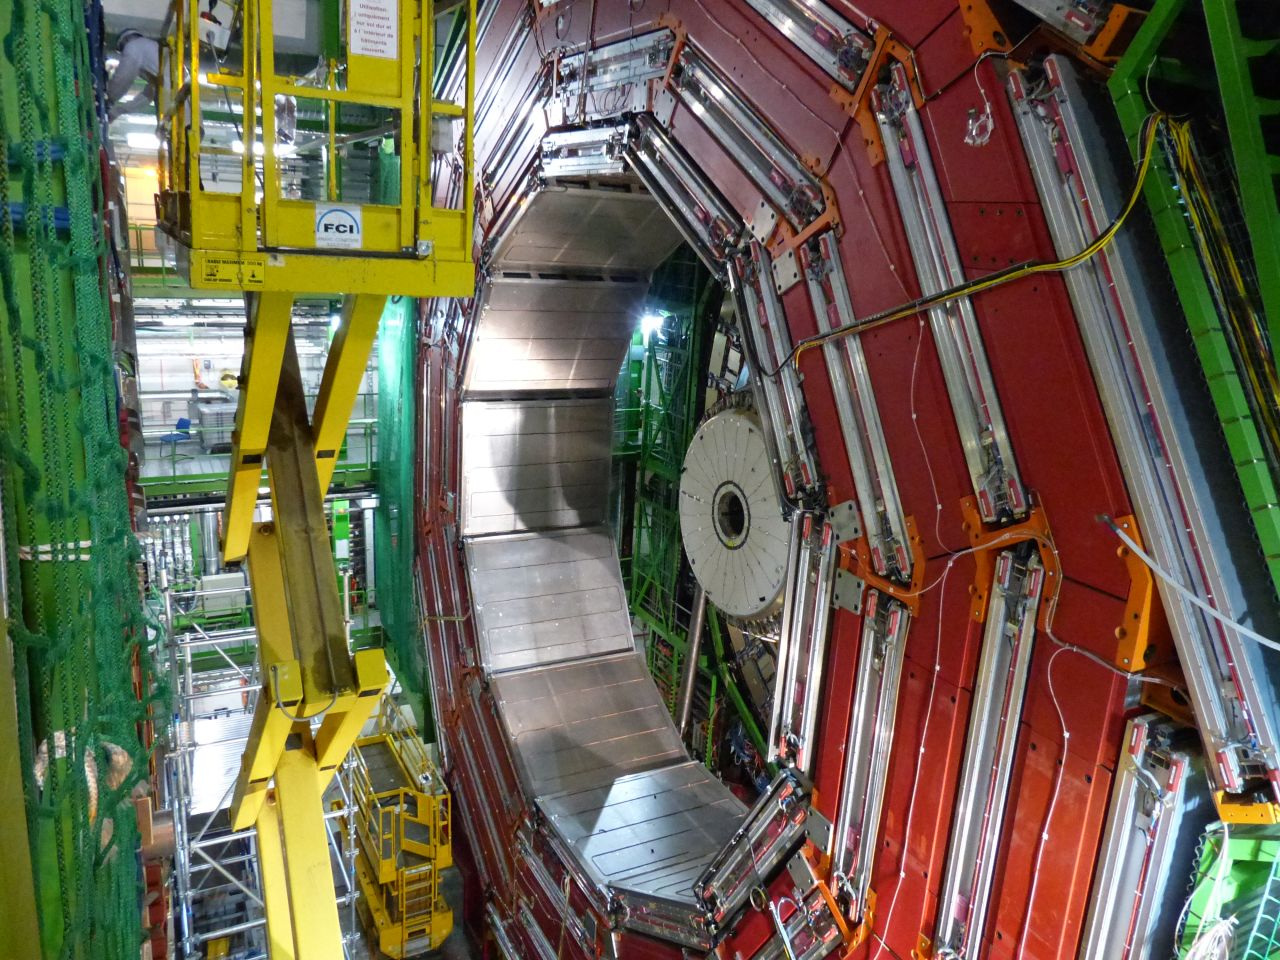 An image of the Compact Muon Solenoid (CMS) experiment. "The Higgs boson is the last missing piece of our current understanding of the most fundamental nature of the universe," Martin Archer, a physicist at Imperial College in London, told CNN. "Only now with the LHC [Large Hadron Collider] are we able to really tick that box off and say 'This is how the universe works, or at least we think it does'."